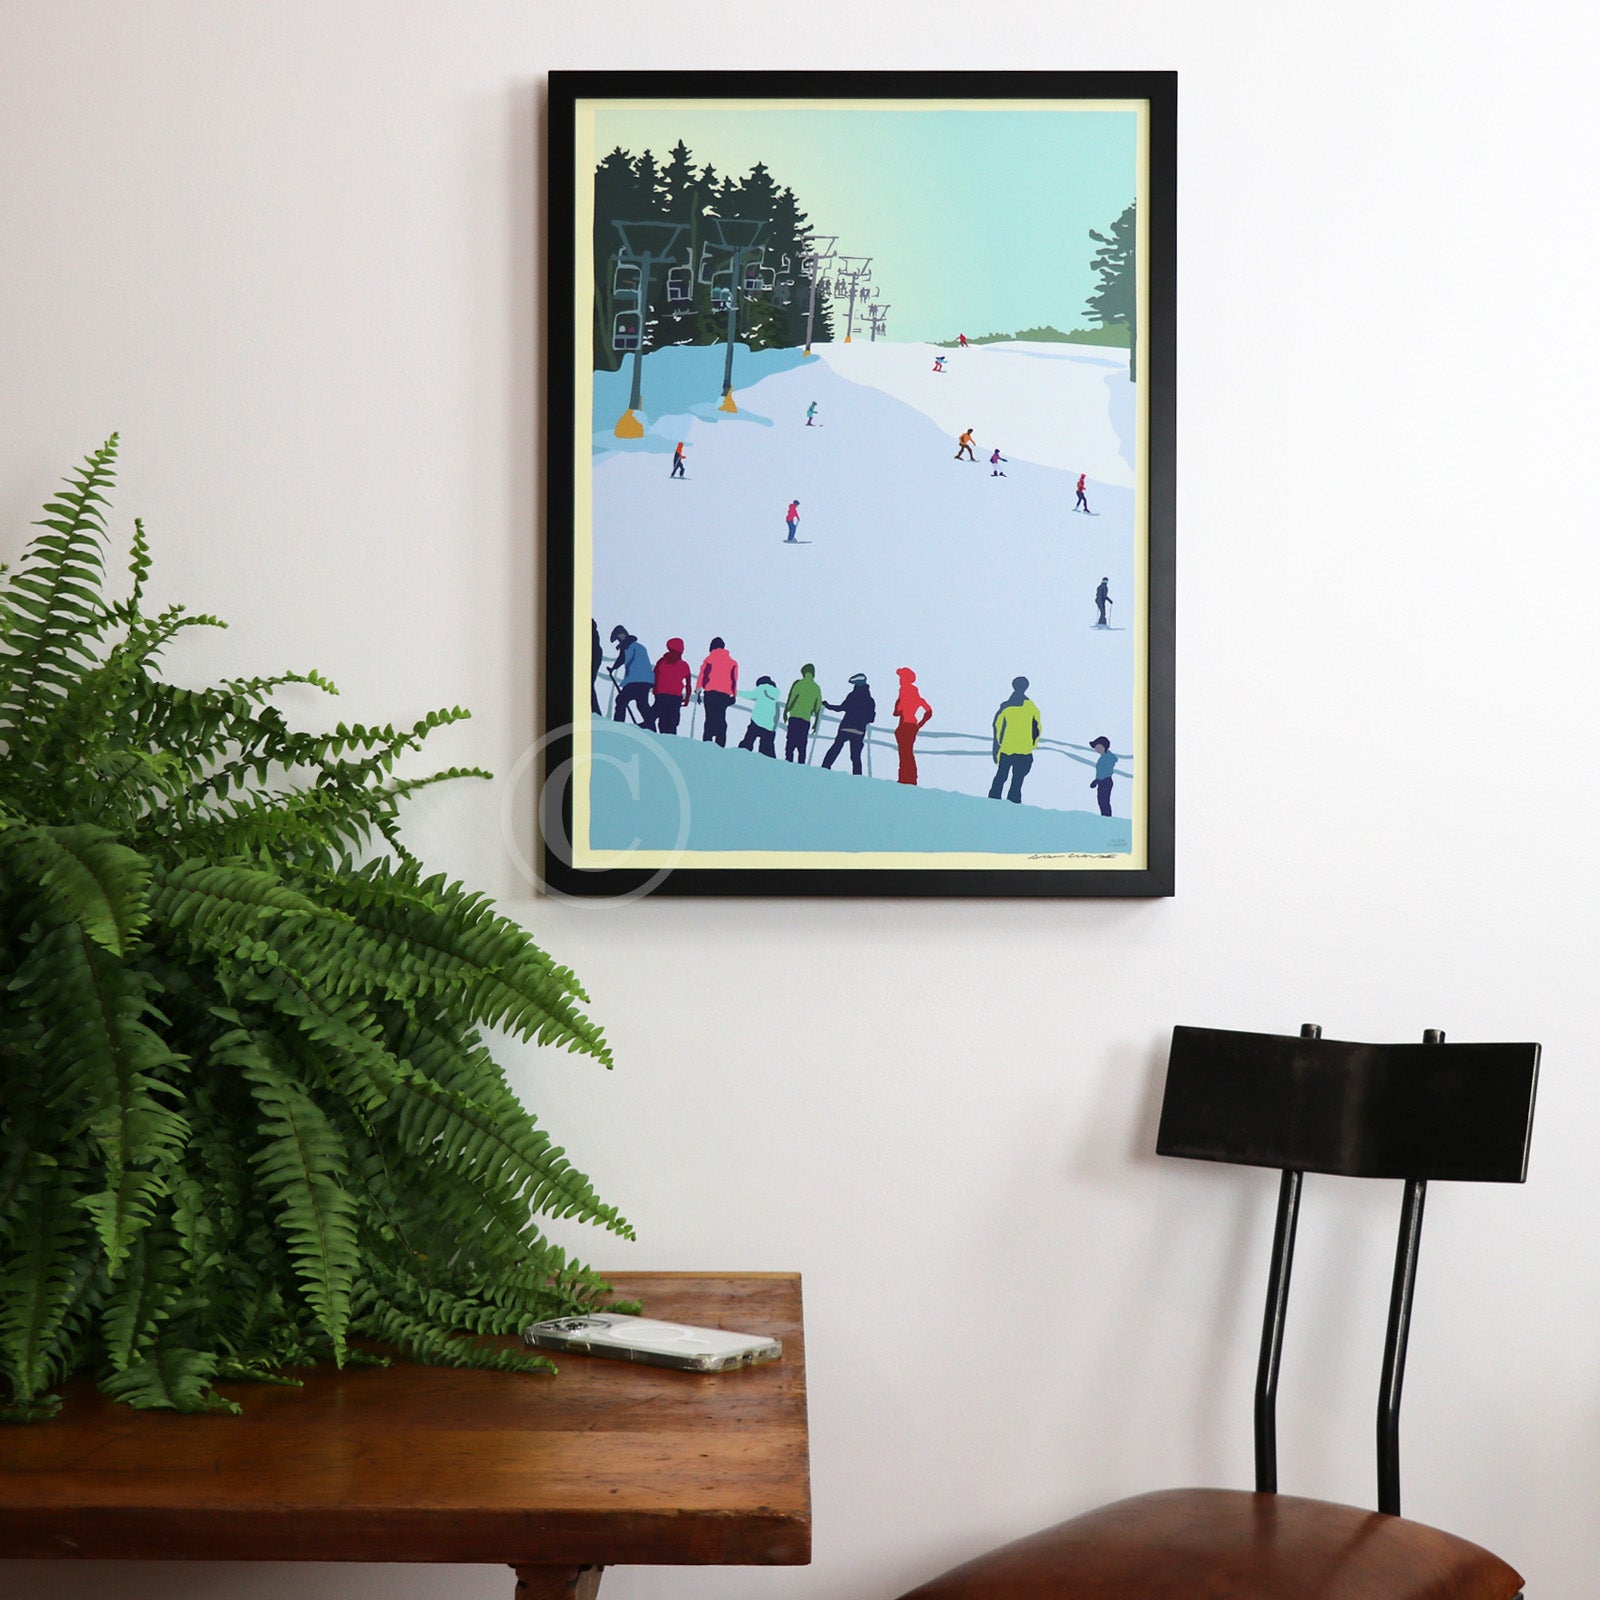 Skiing Snow Bowl Art Print 18" x 24" Framed Wall Poster By Alan Claude - Maine